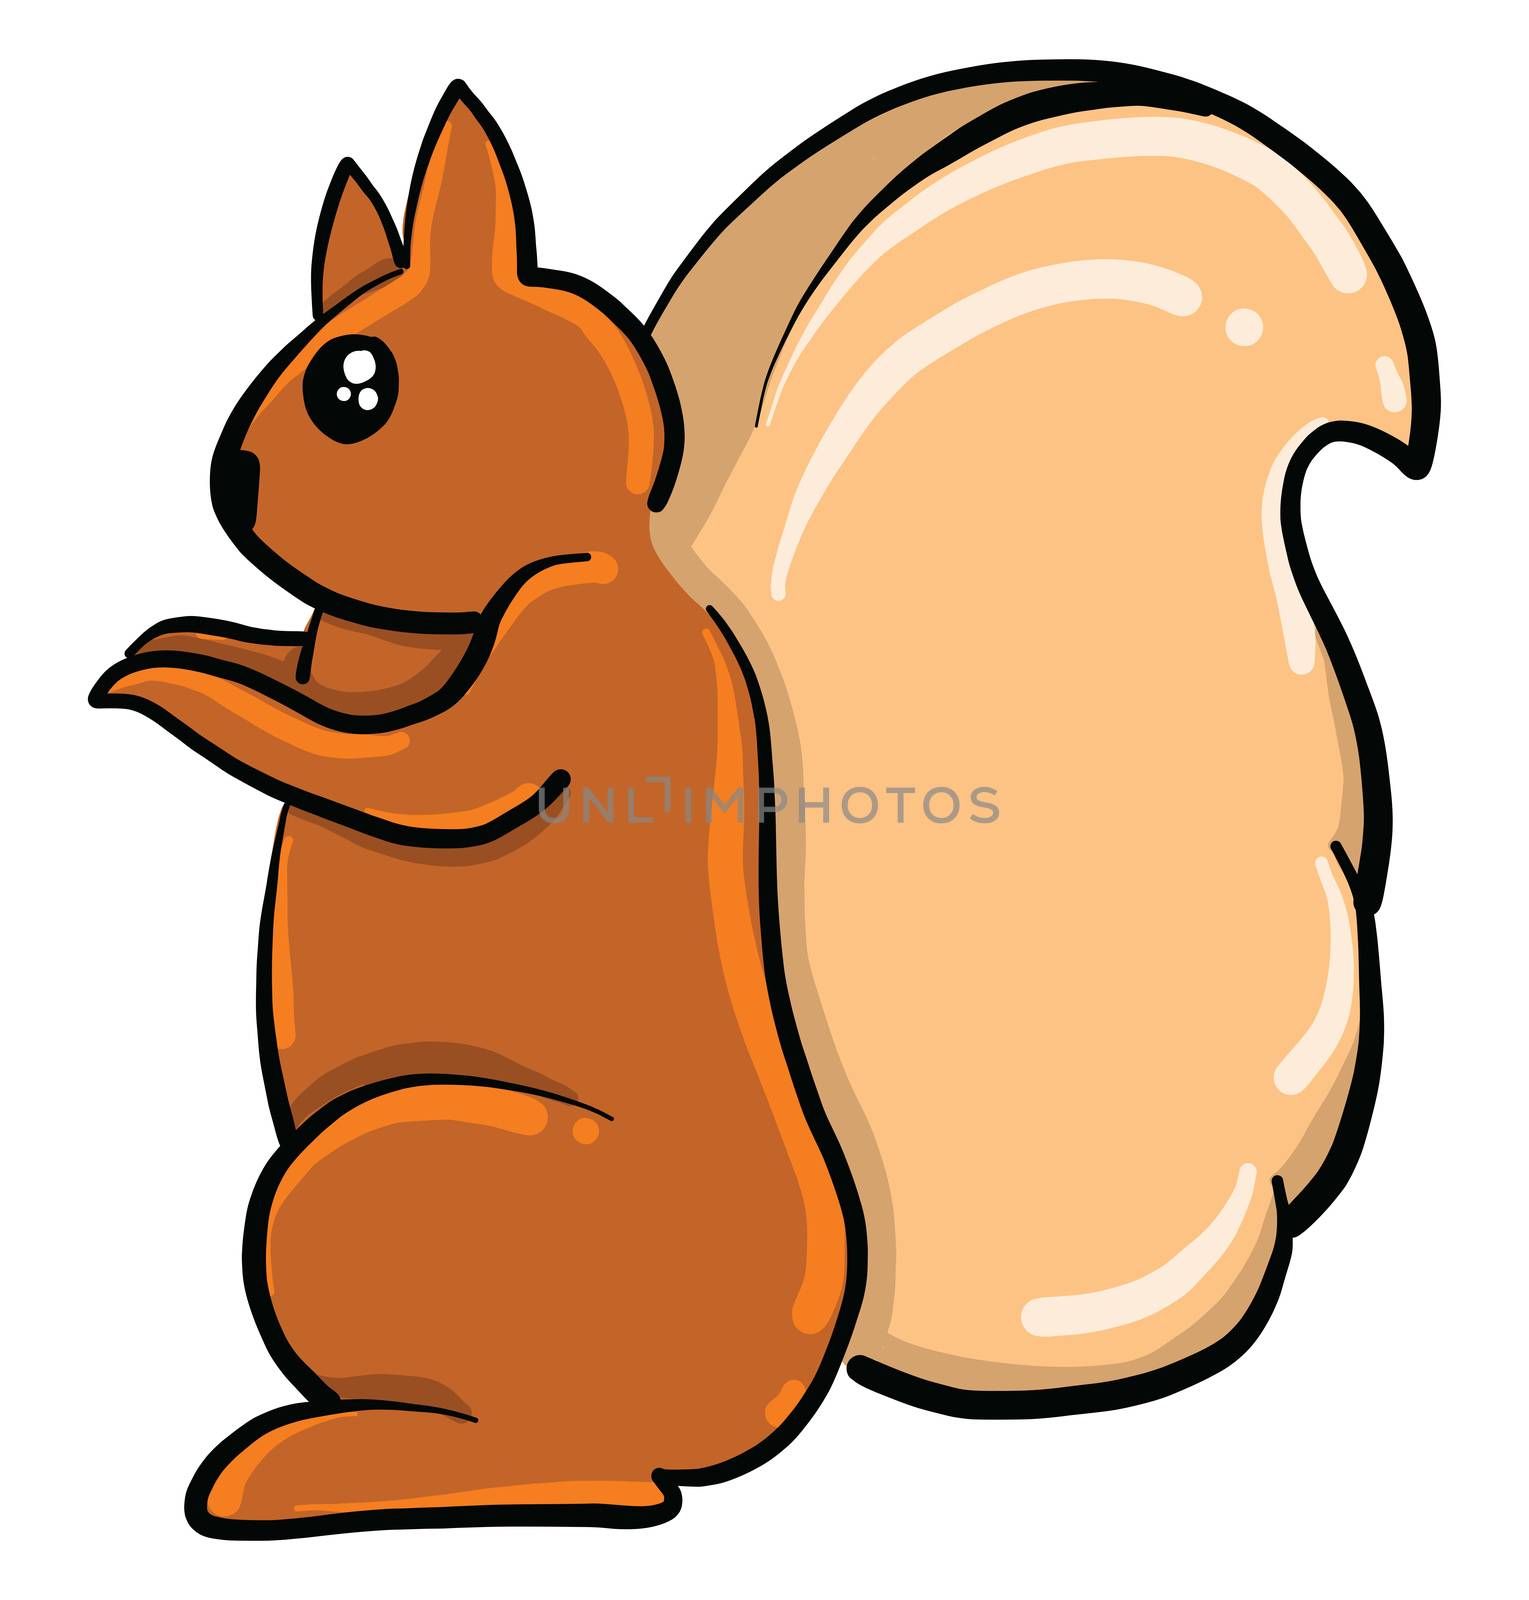 Brown squirrel , illustration, vector on white background